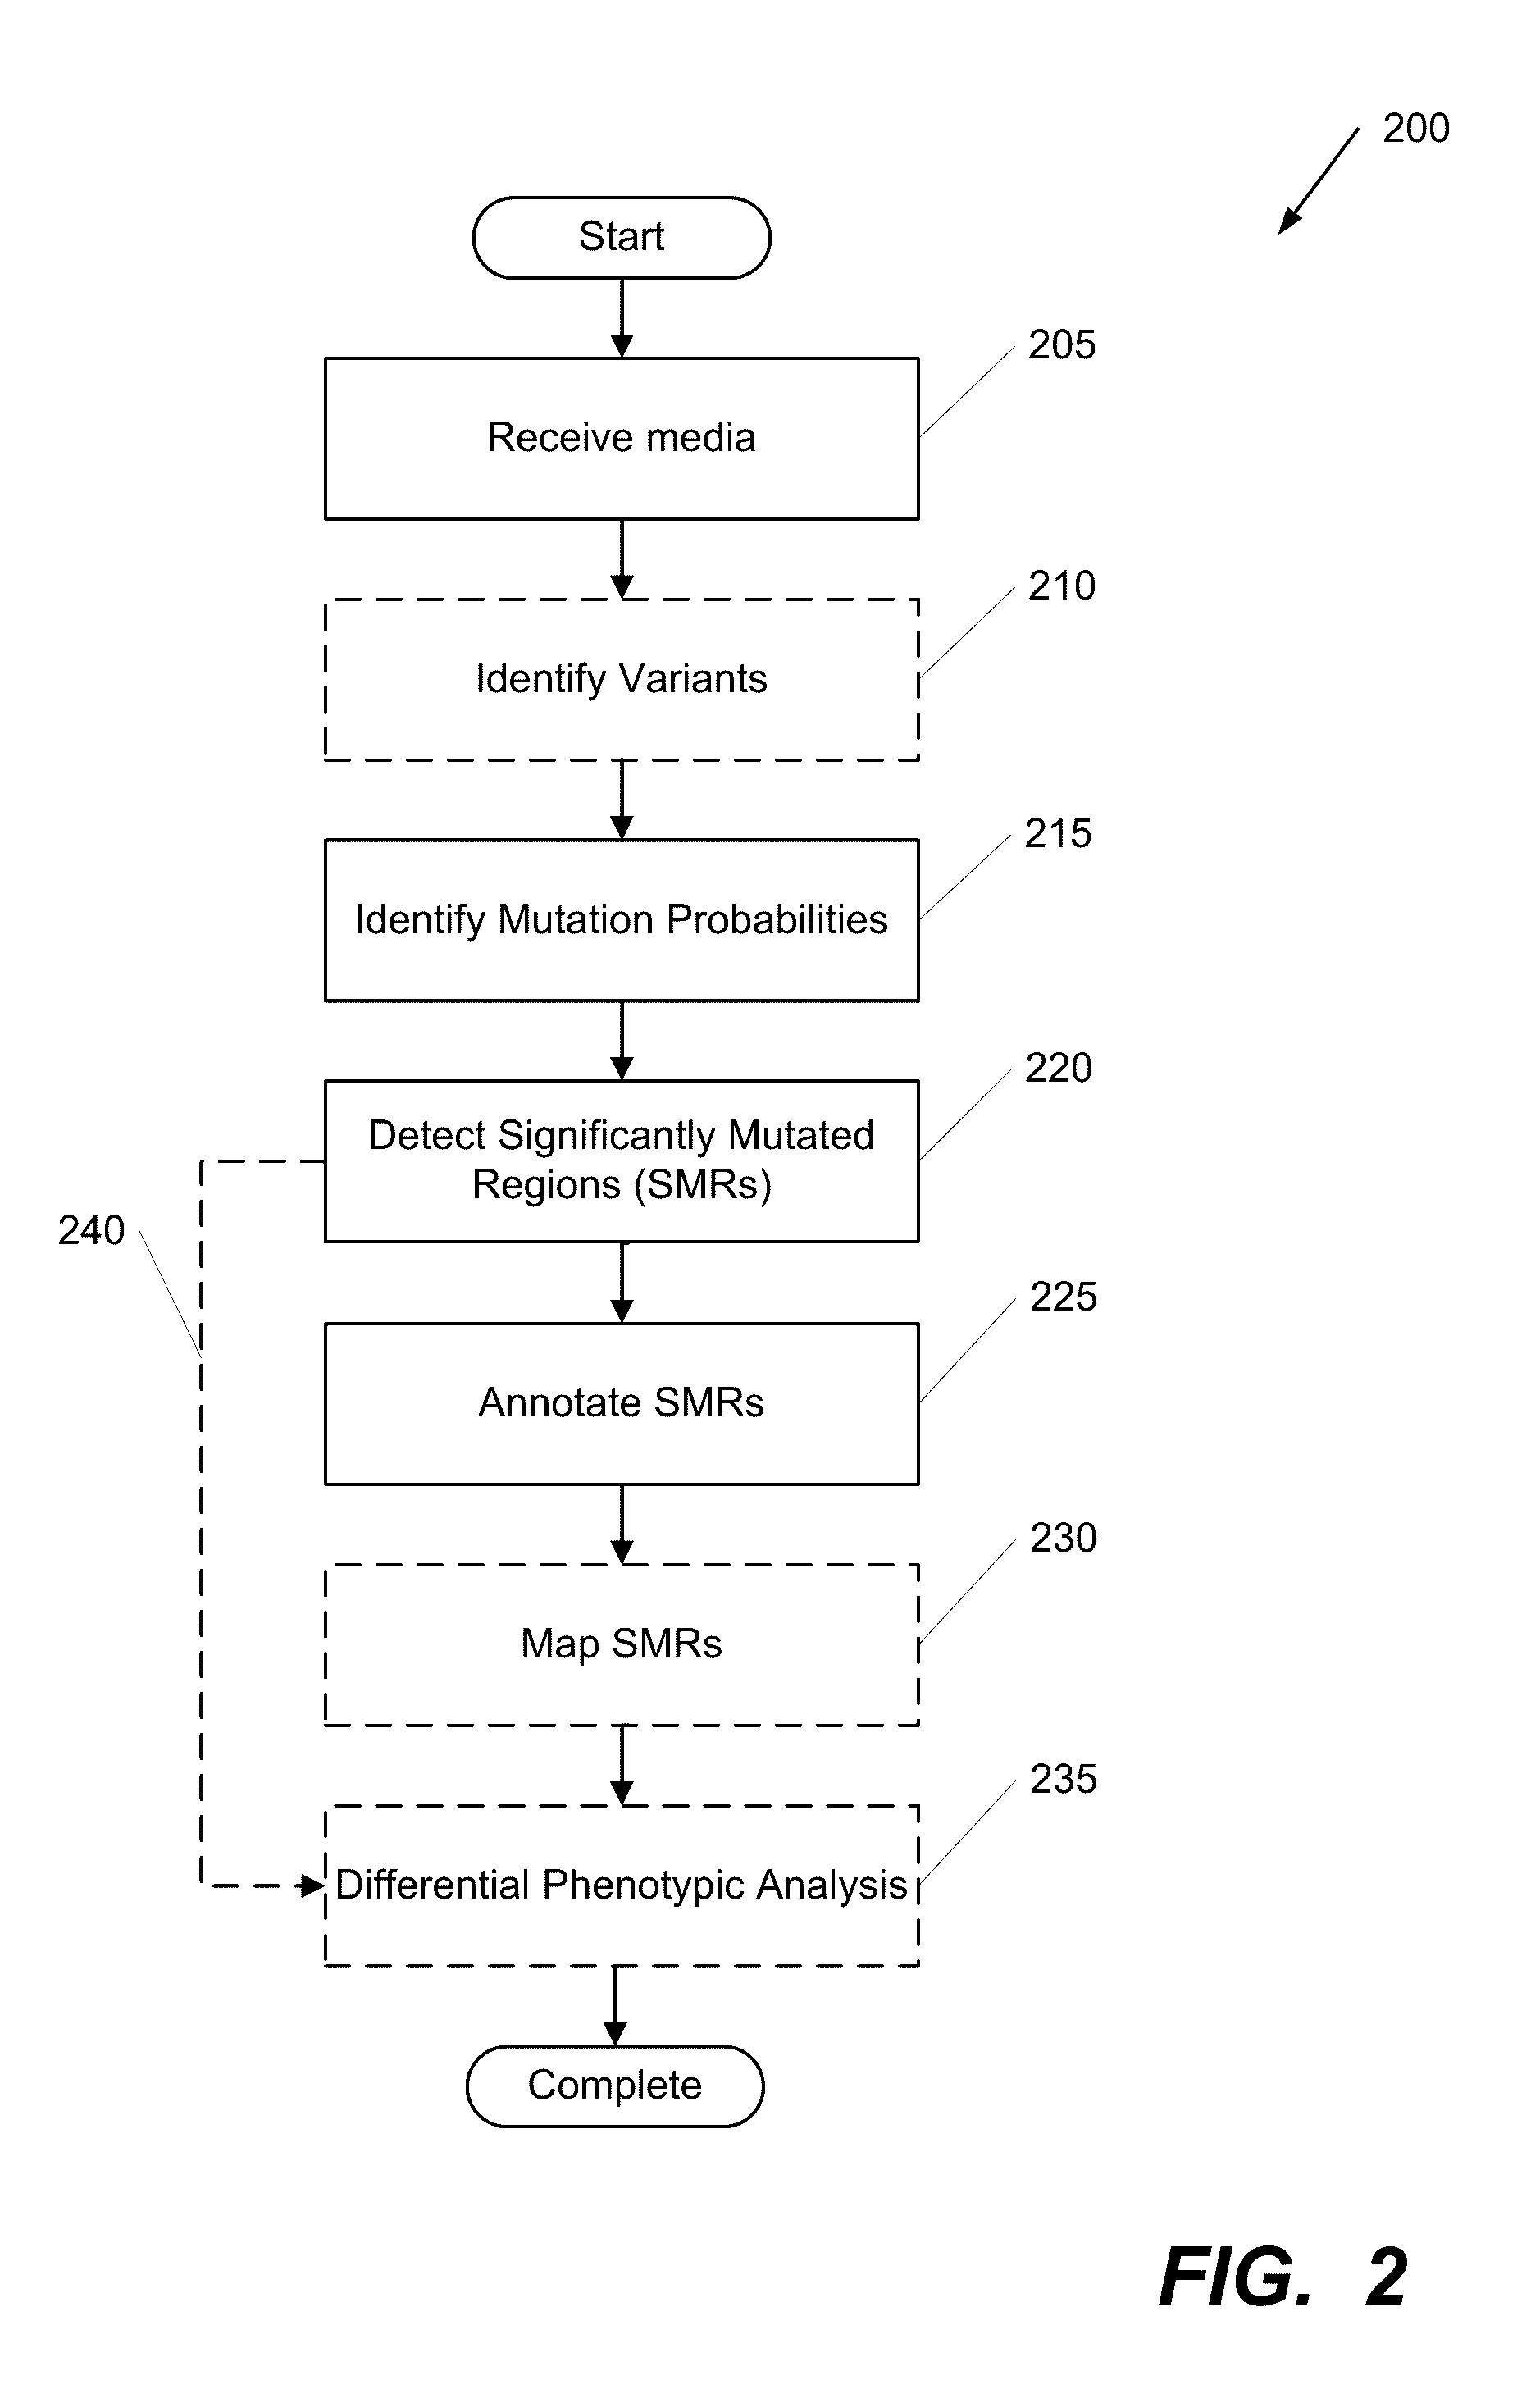 Systems and Methods for Multi-Scale, Annotation-Independent Detection of Functionally-Diverse Units of Recurrent Genomic Alteration